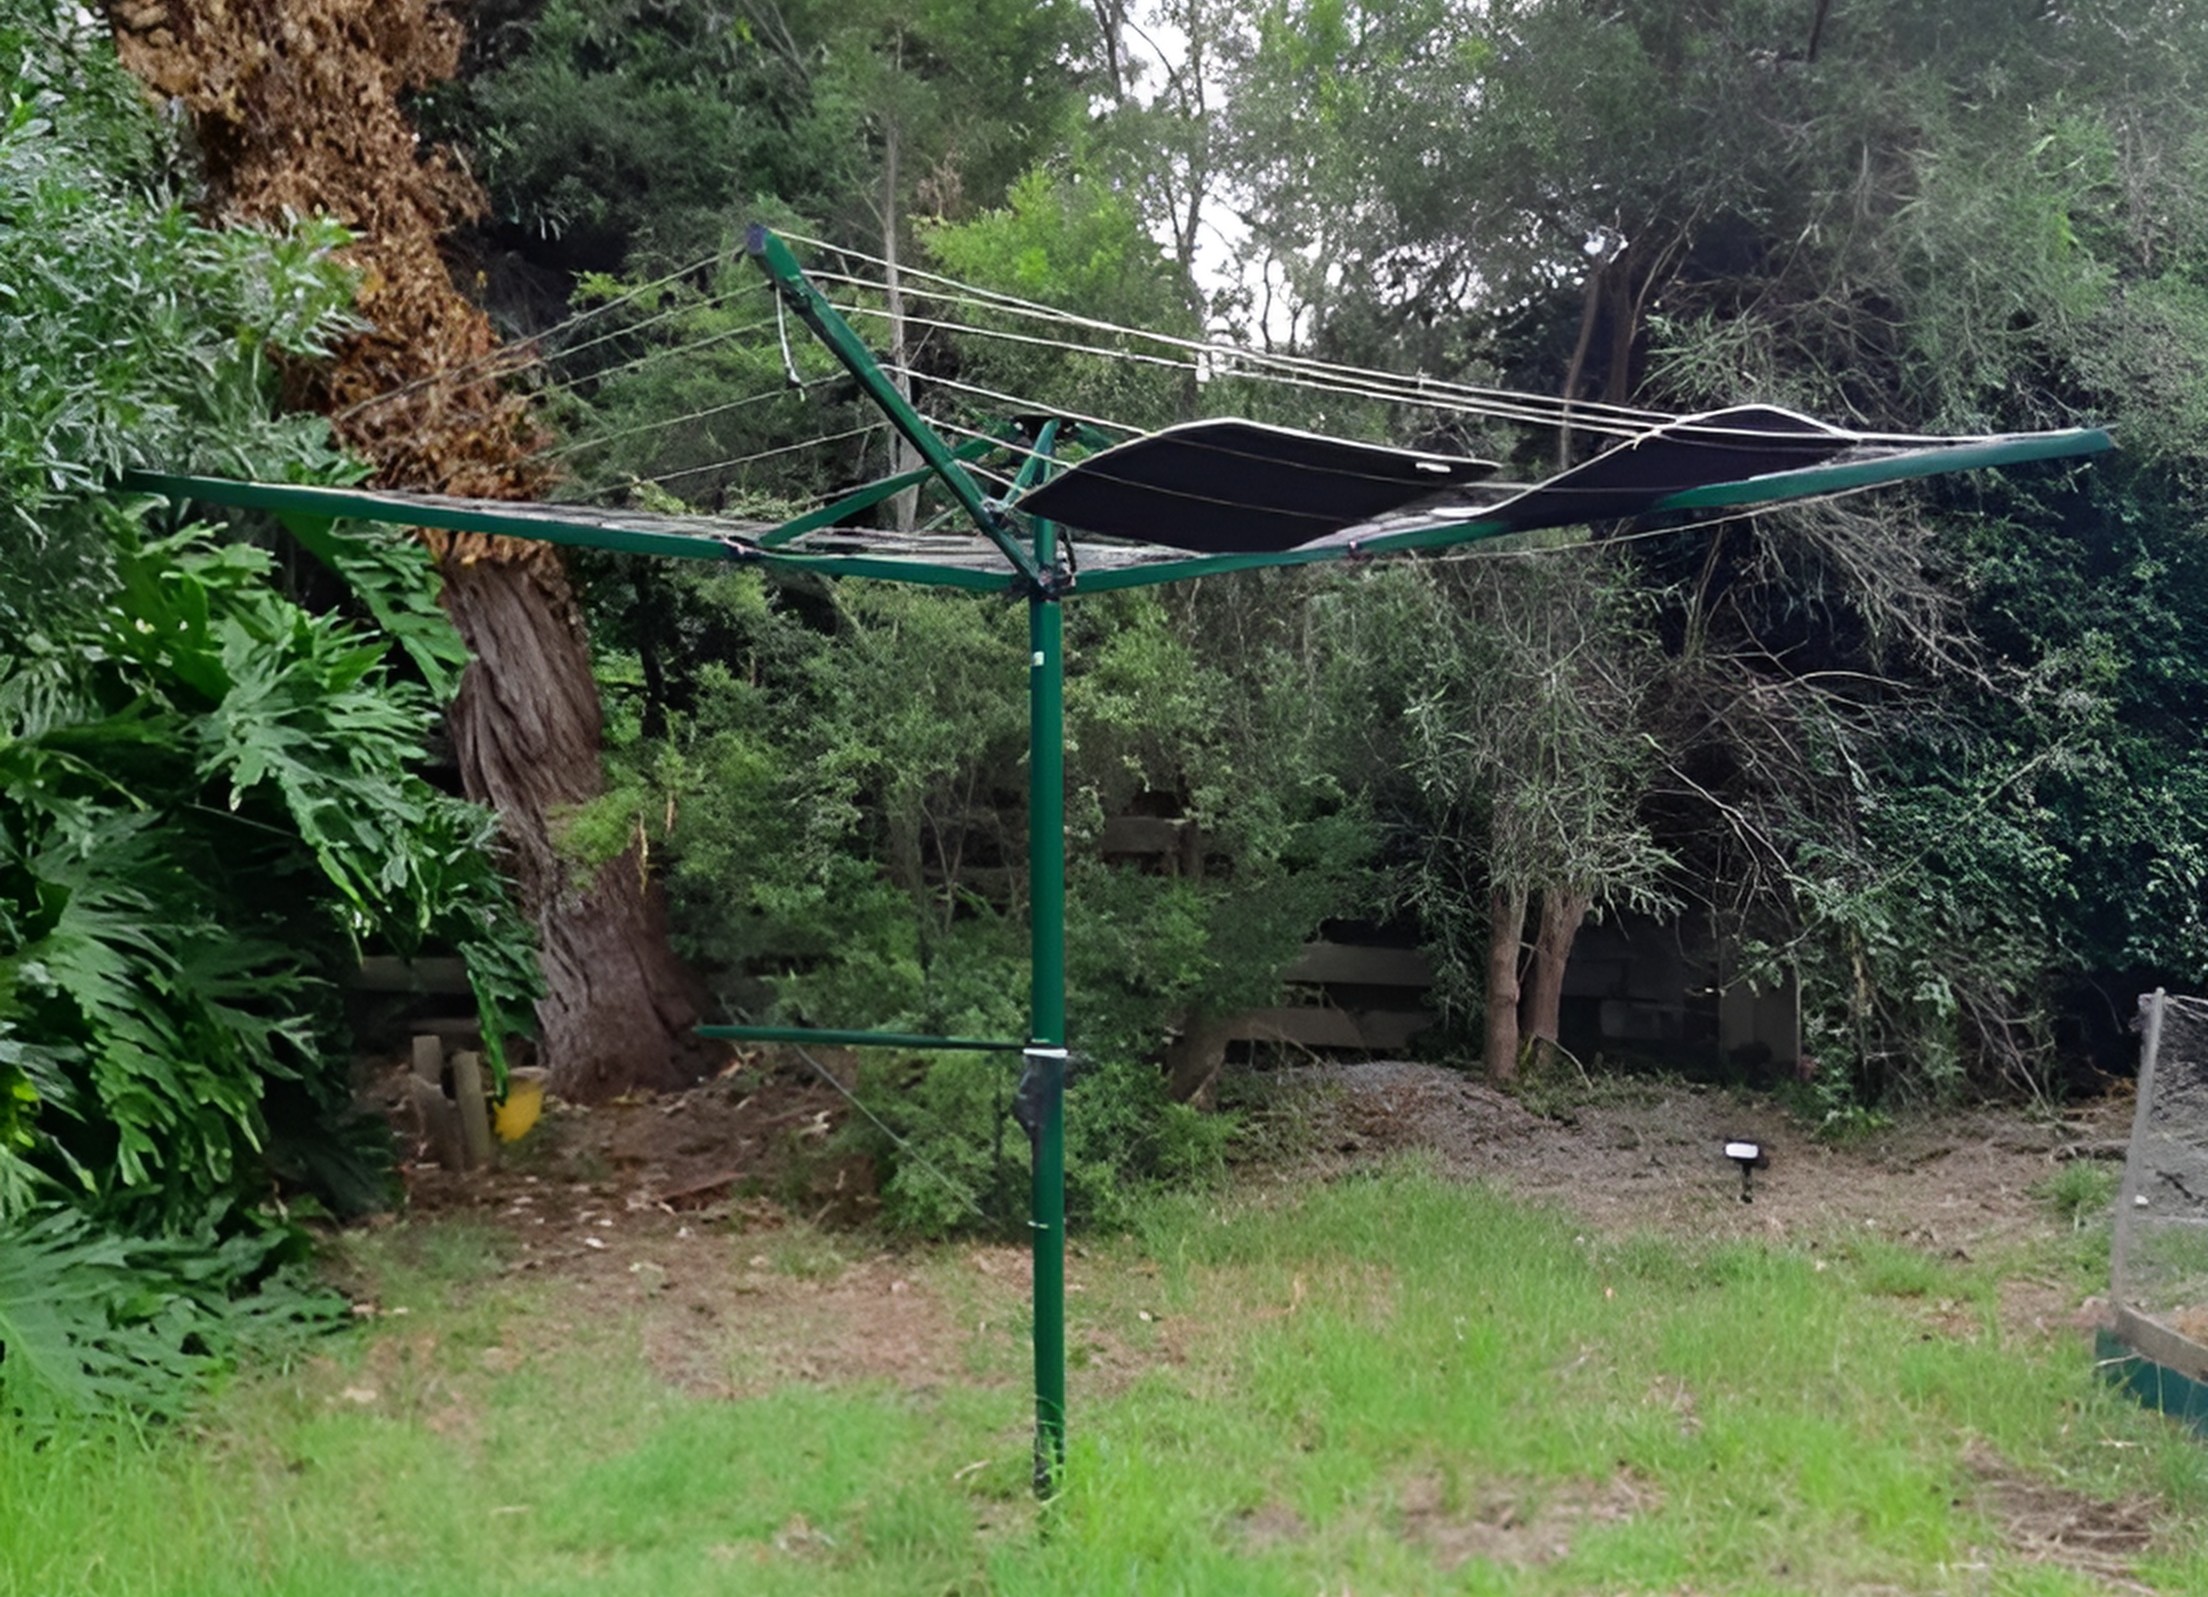 Austral Foldaway 51 Rotary Clothesline Customer Reviews and Experiences: